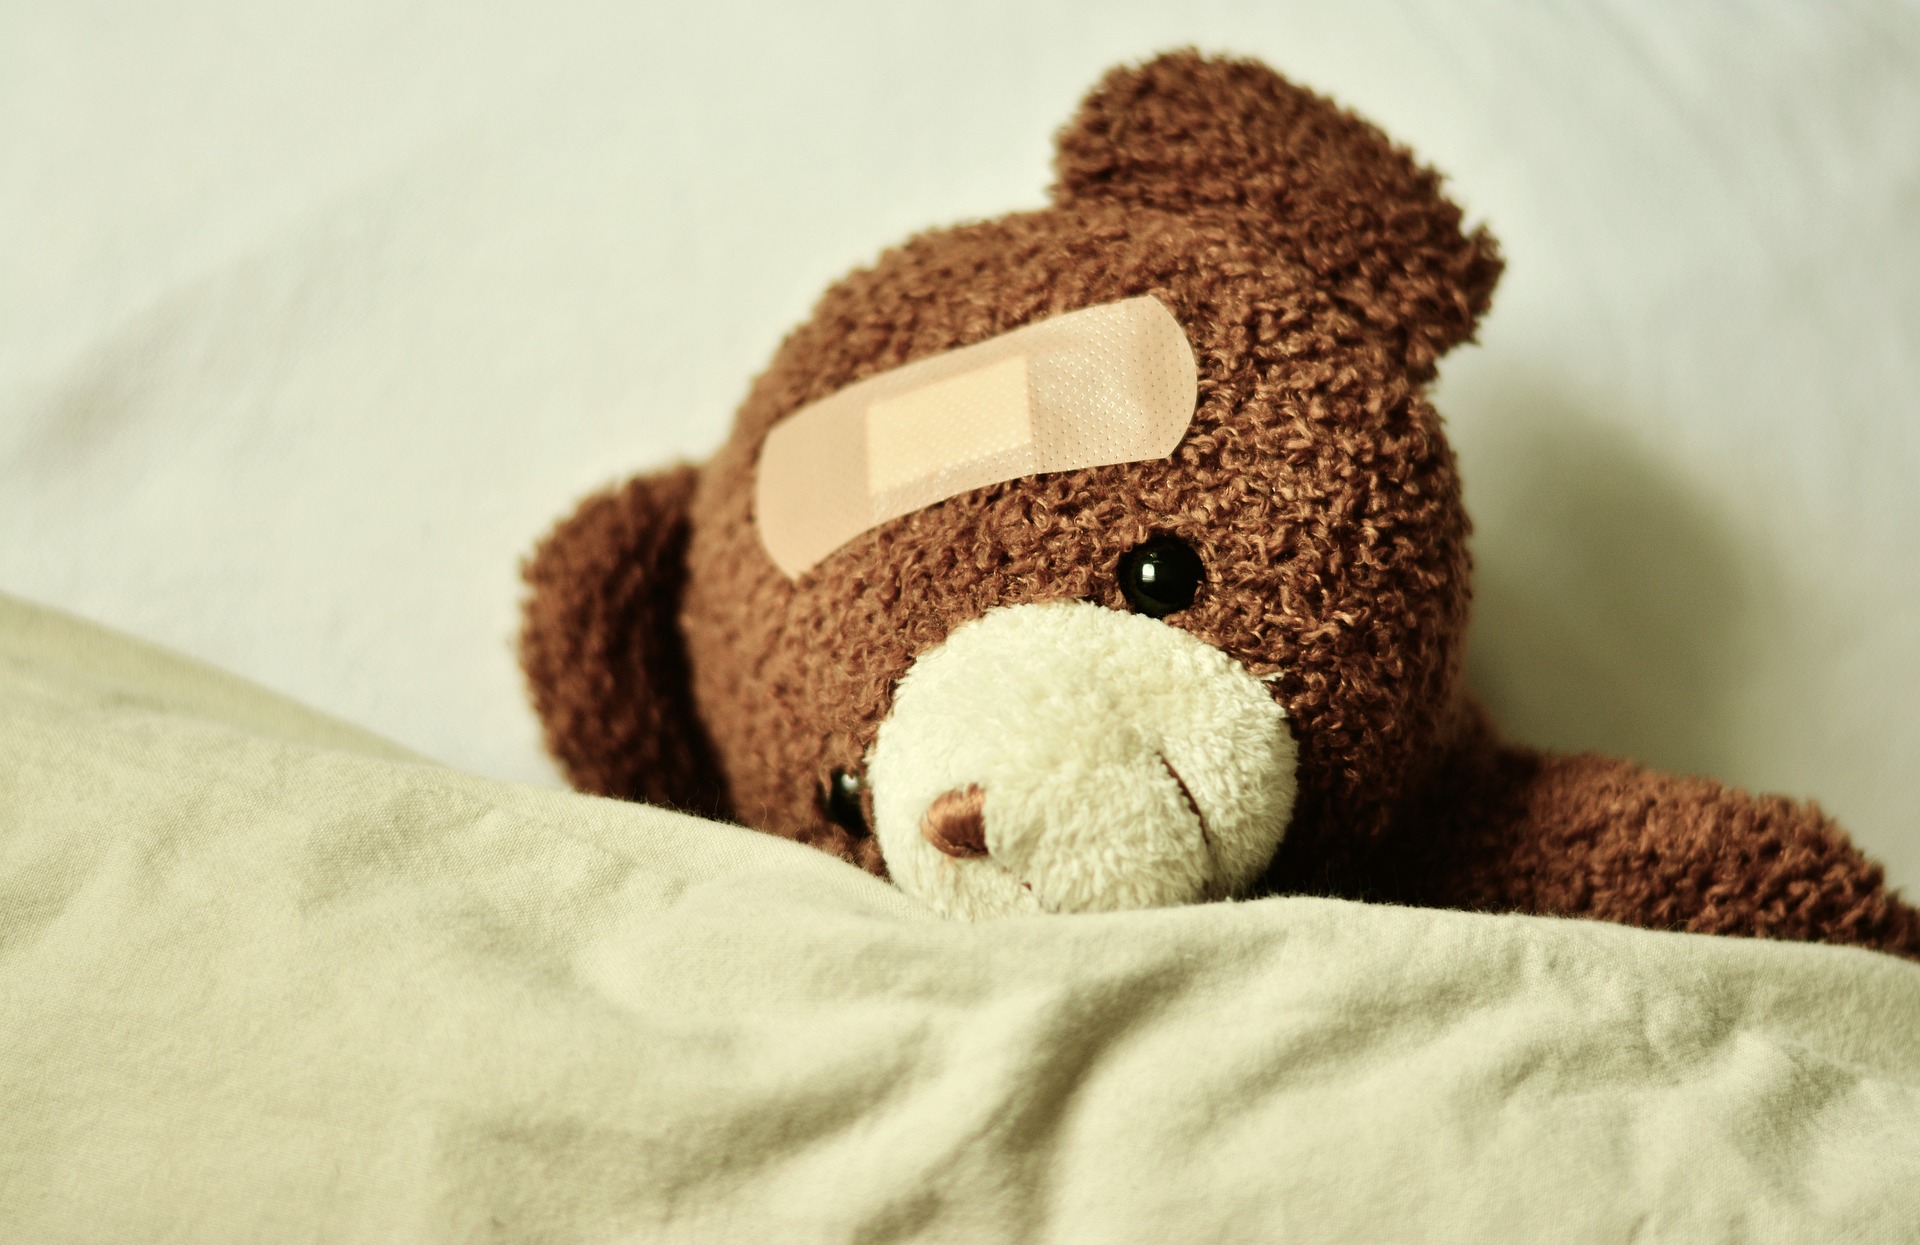 Cute teddy bear in bed with band-aid on forehead